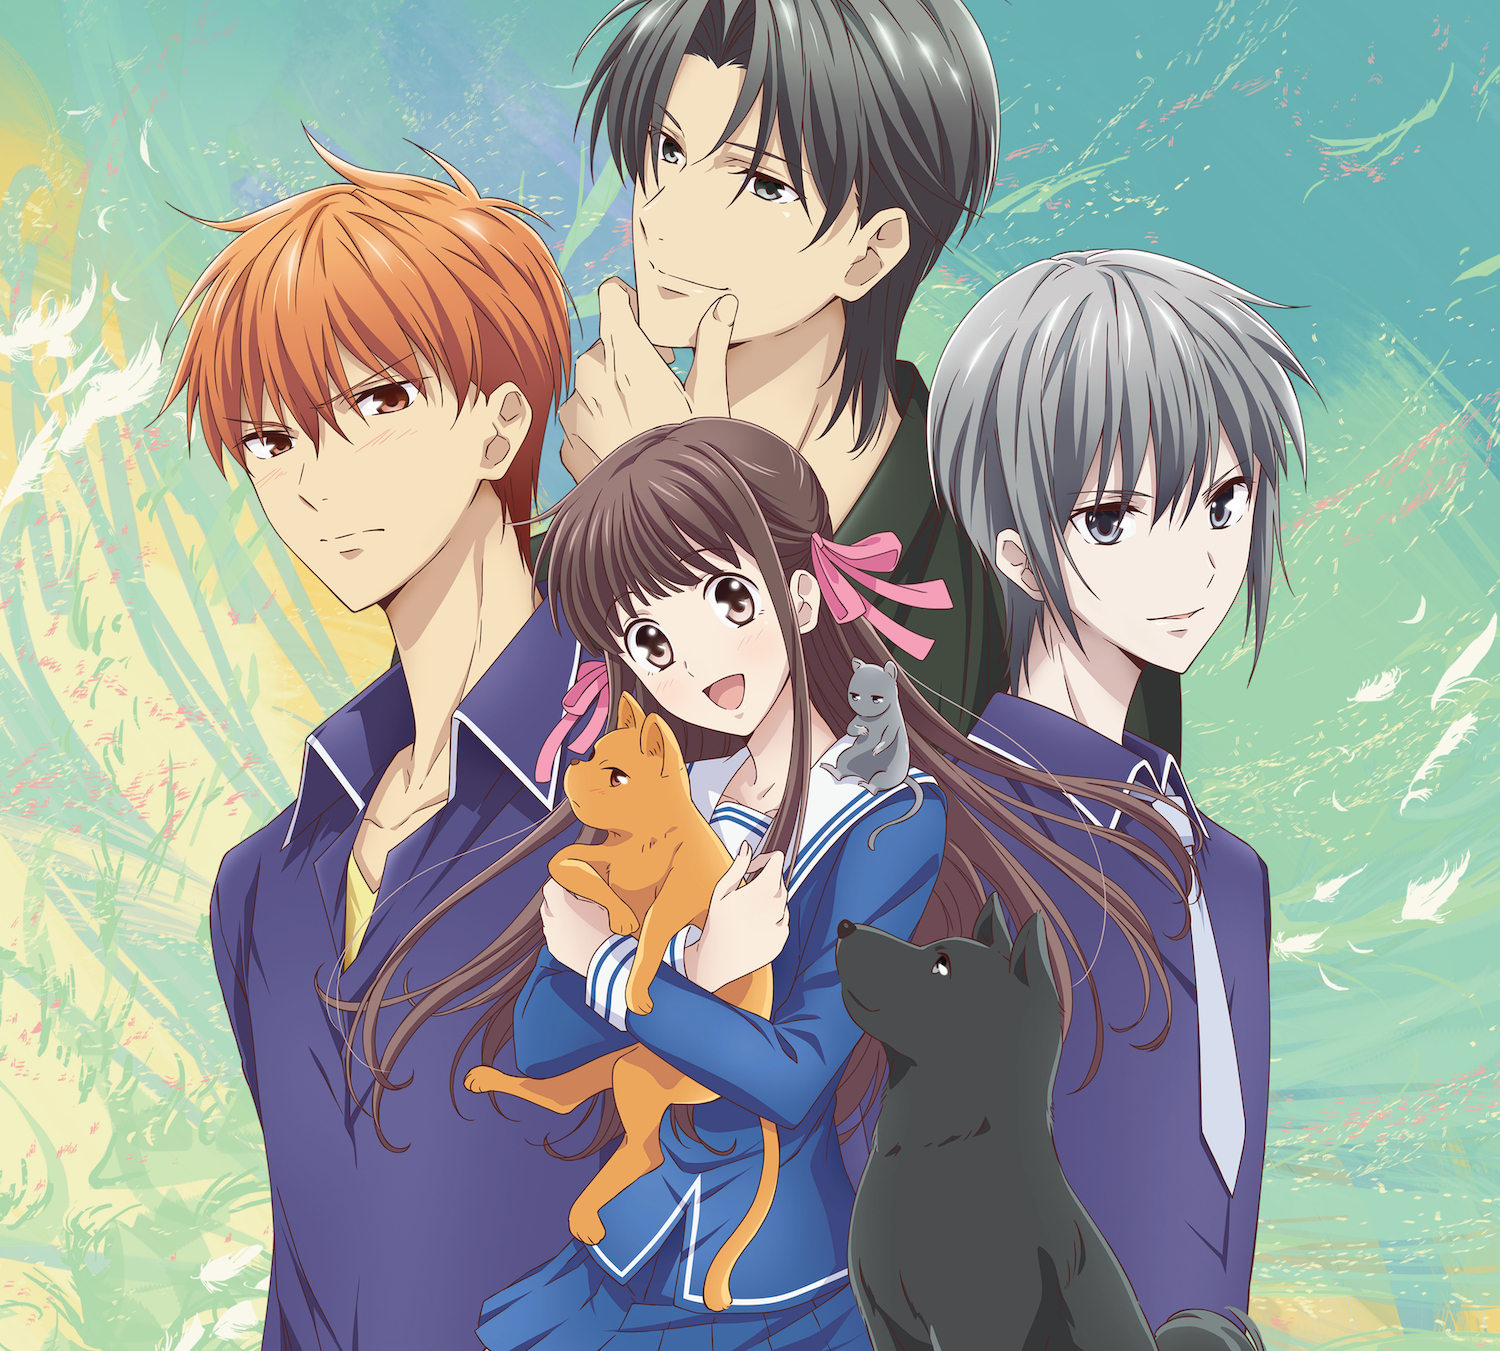 The cast of Fruits Basket. Tohru is a high school girl surrounded by two high school boys, an older man, a cat, a dog, and a rat.